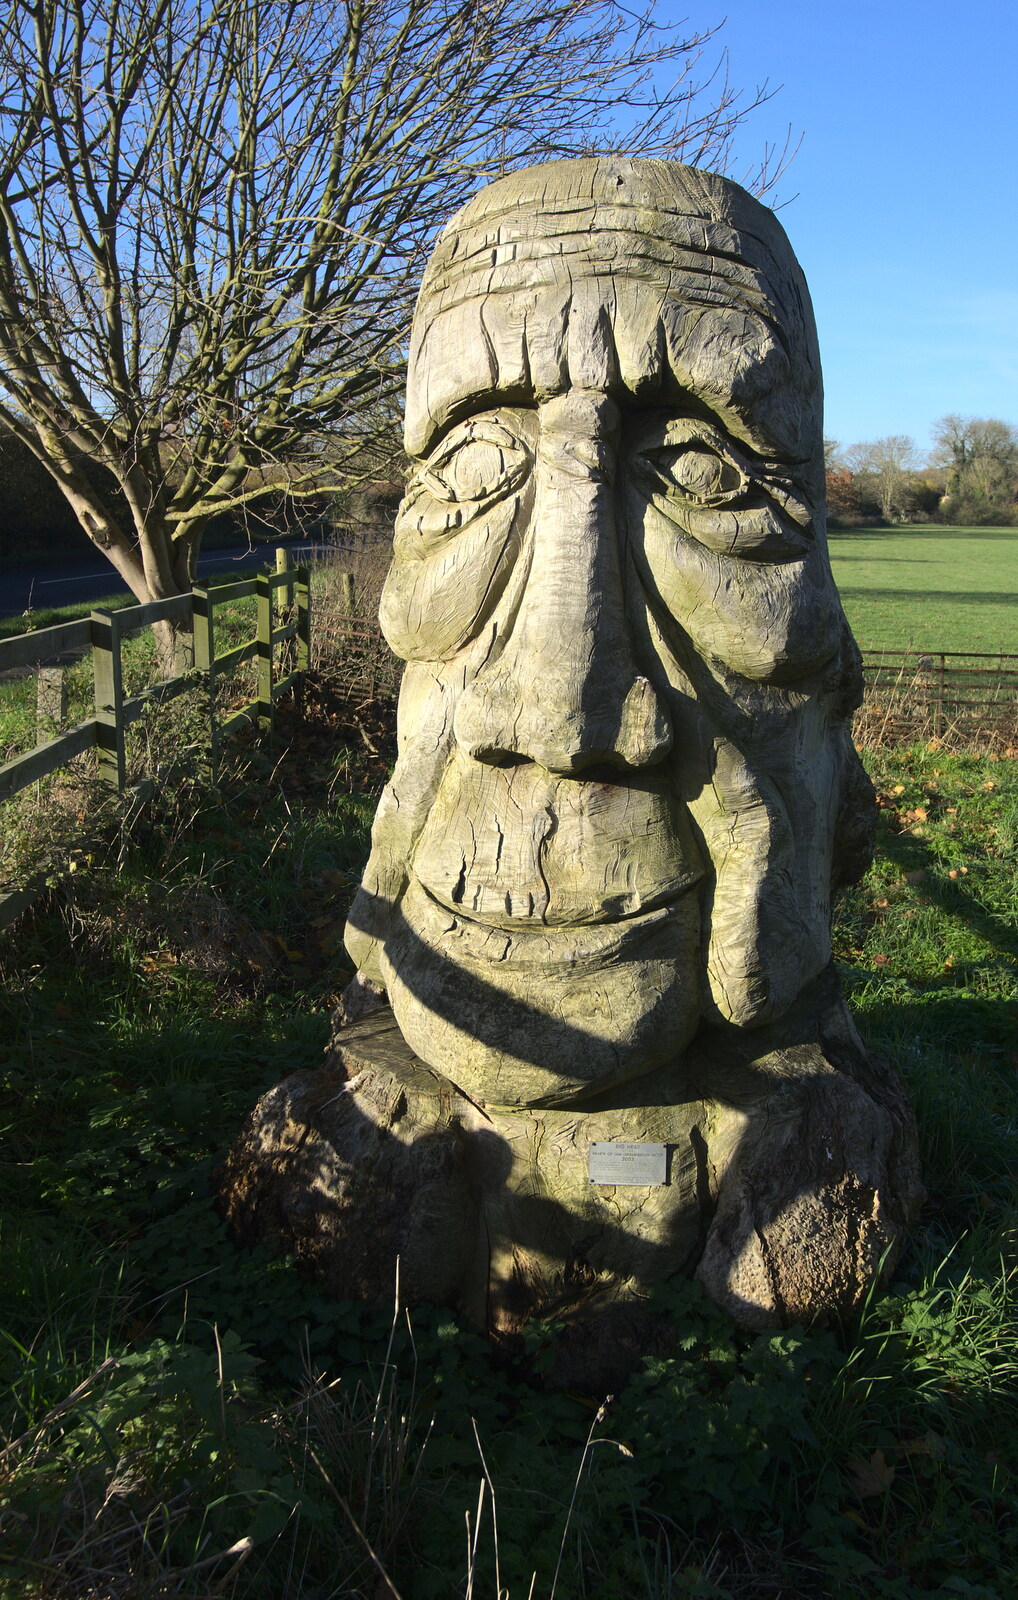 The Big Giant Head from Sis Comes to Visit, Eye, Suffolk - 18th November 2012